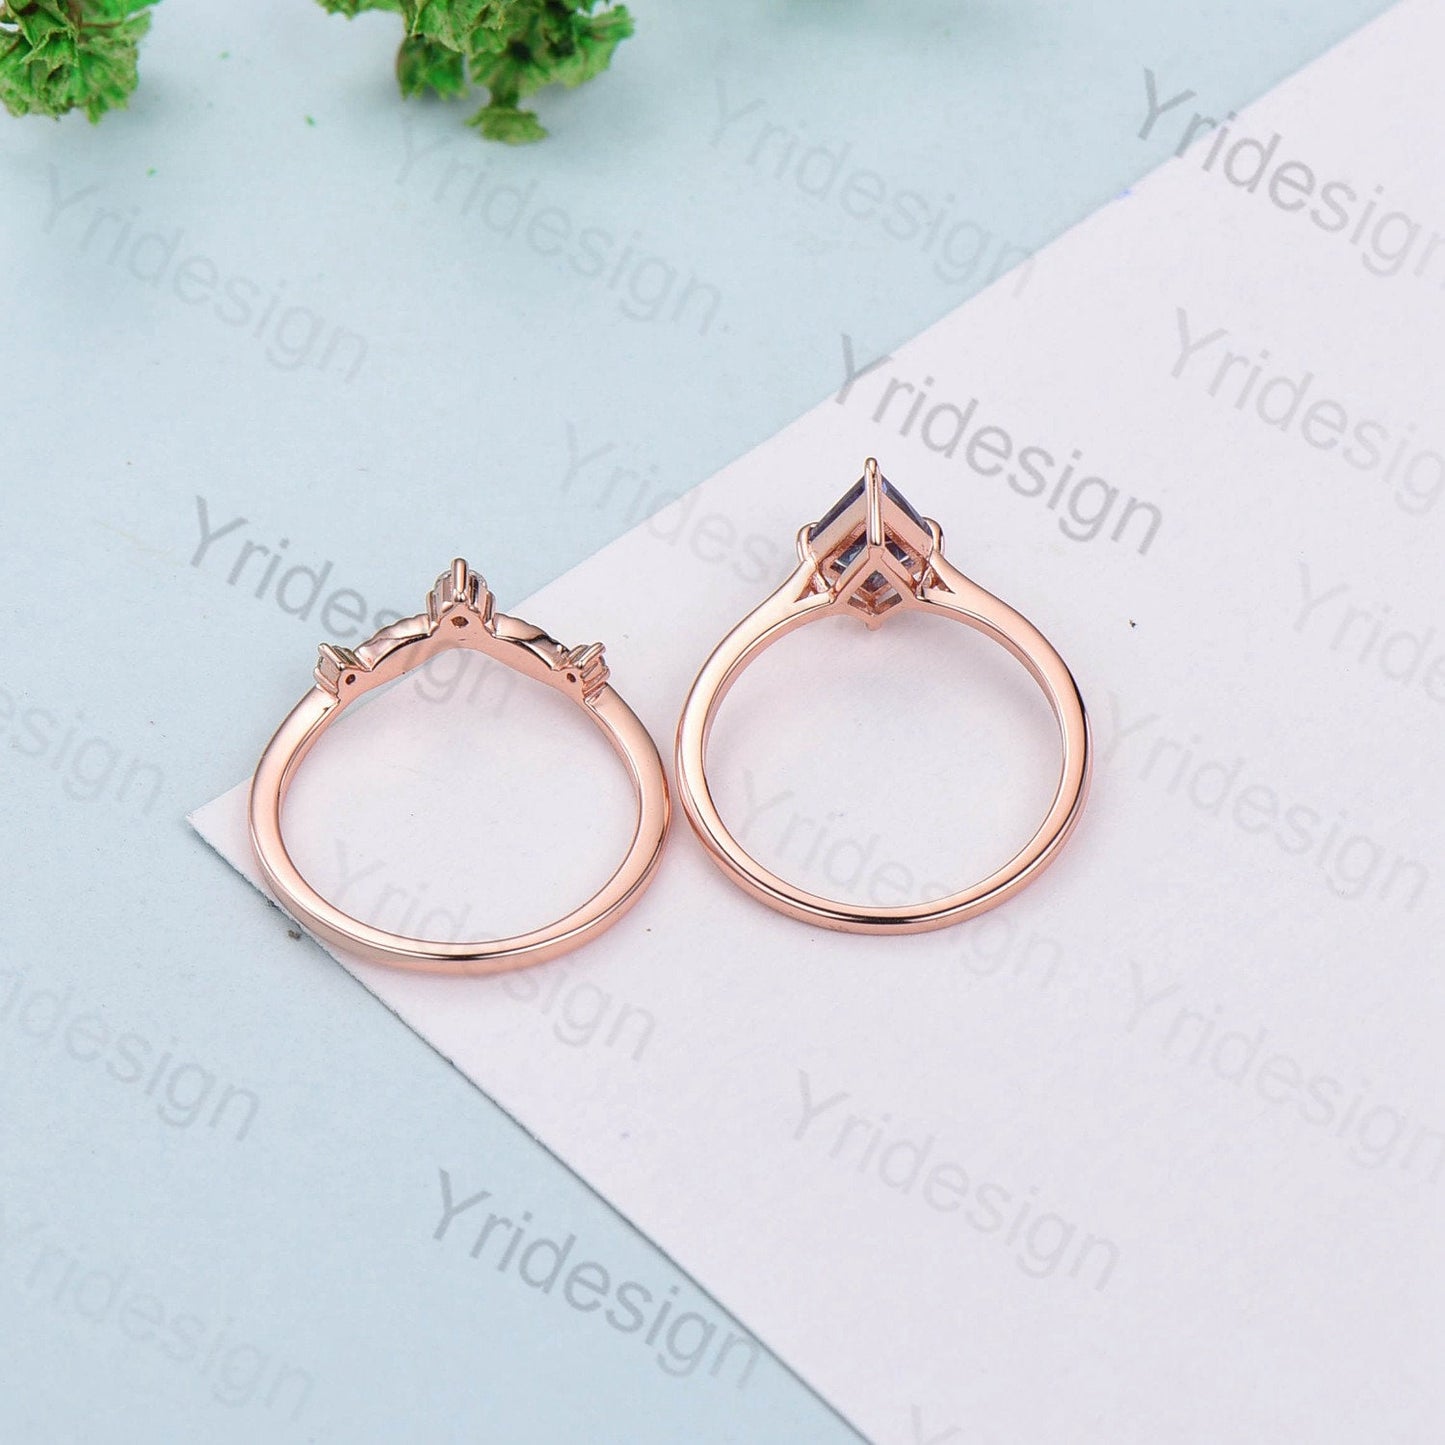 Minimalist Peridot Ring kite shaped Dainty engagement ring set rose gold Solitaire Bridal Set leaf stacking band vintage August birthstone - PENFINE